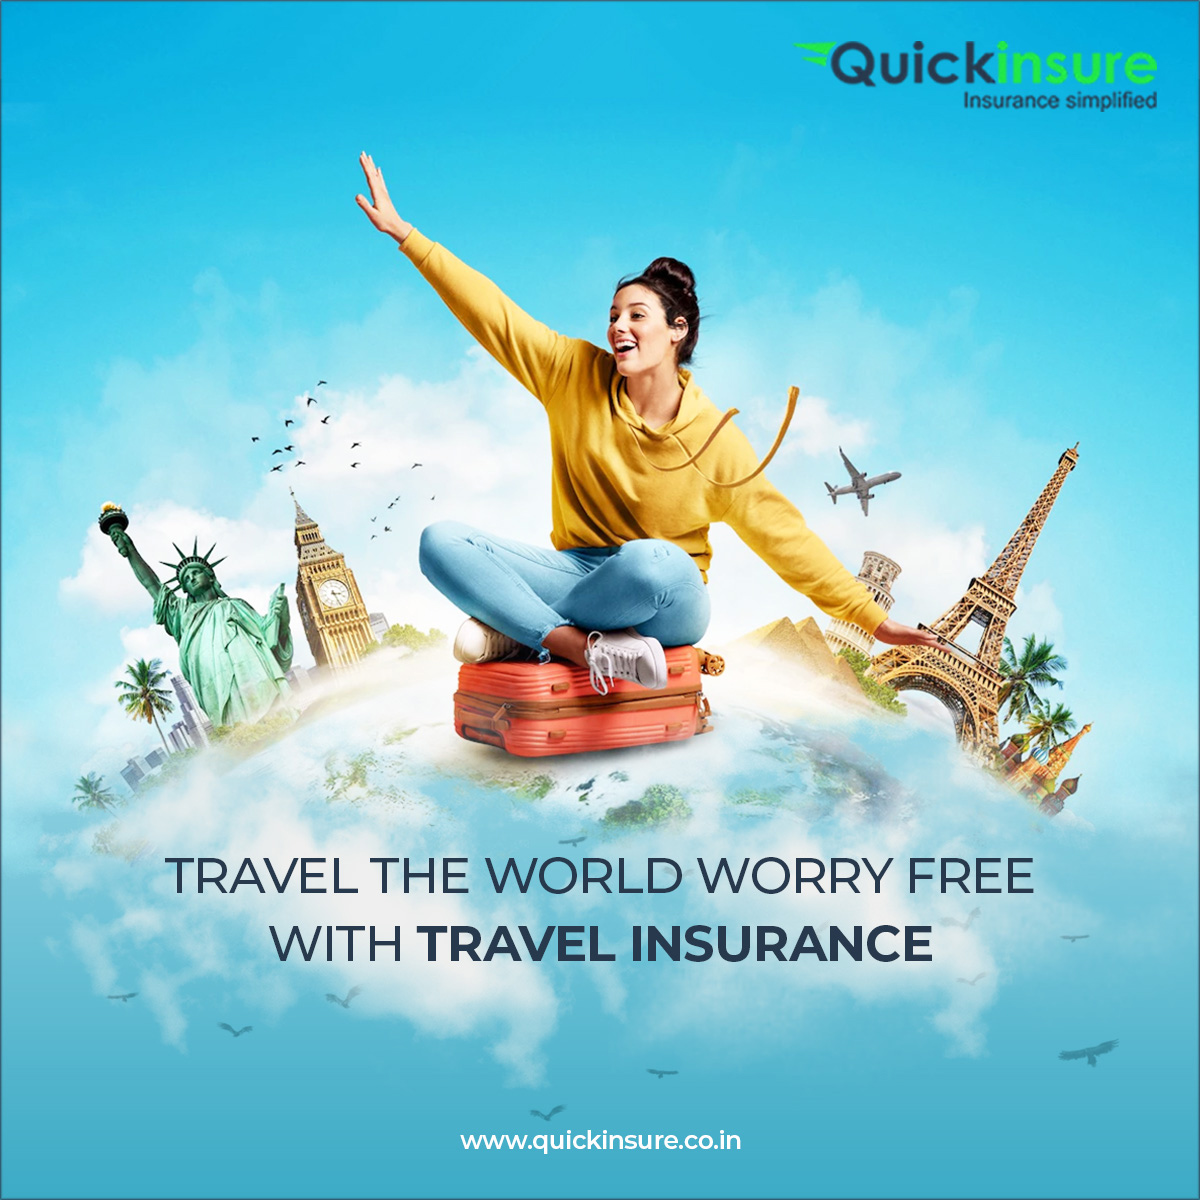 Travel stress-free with the right cover, visit us at bit.ly/3dRk0oa to compare and buy the best Travel Insurance Policy for you.
.
#Travelinsurance #Travel #GeneralInsurance #InsuranceBroker #Traveler #InsureNow #BuyInsurance #CompareInsurance #India #Quickinsure